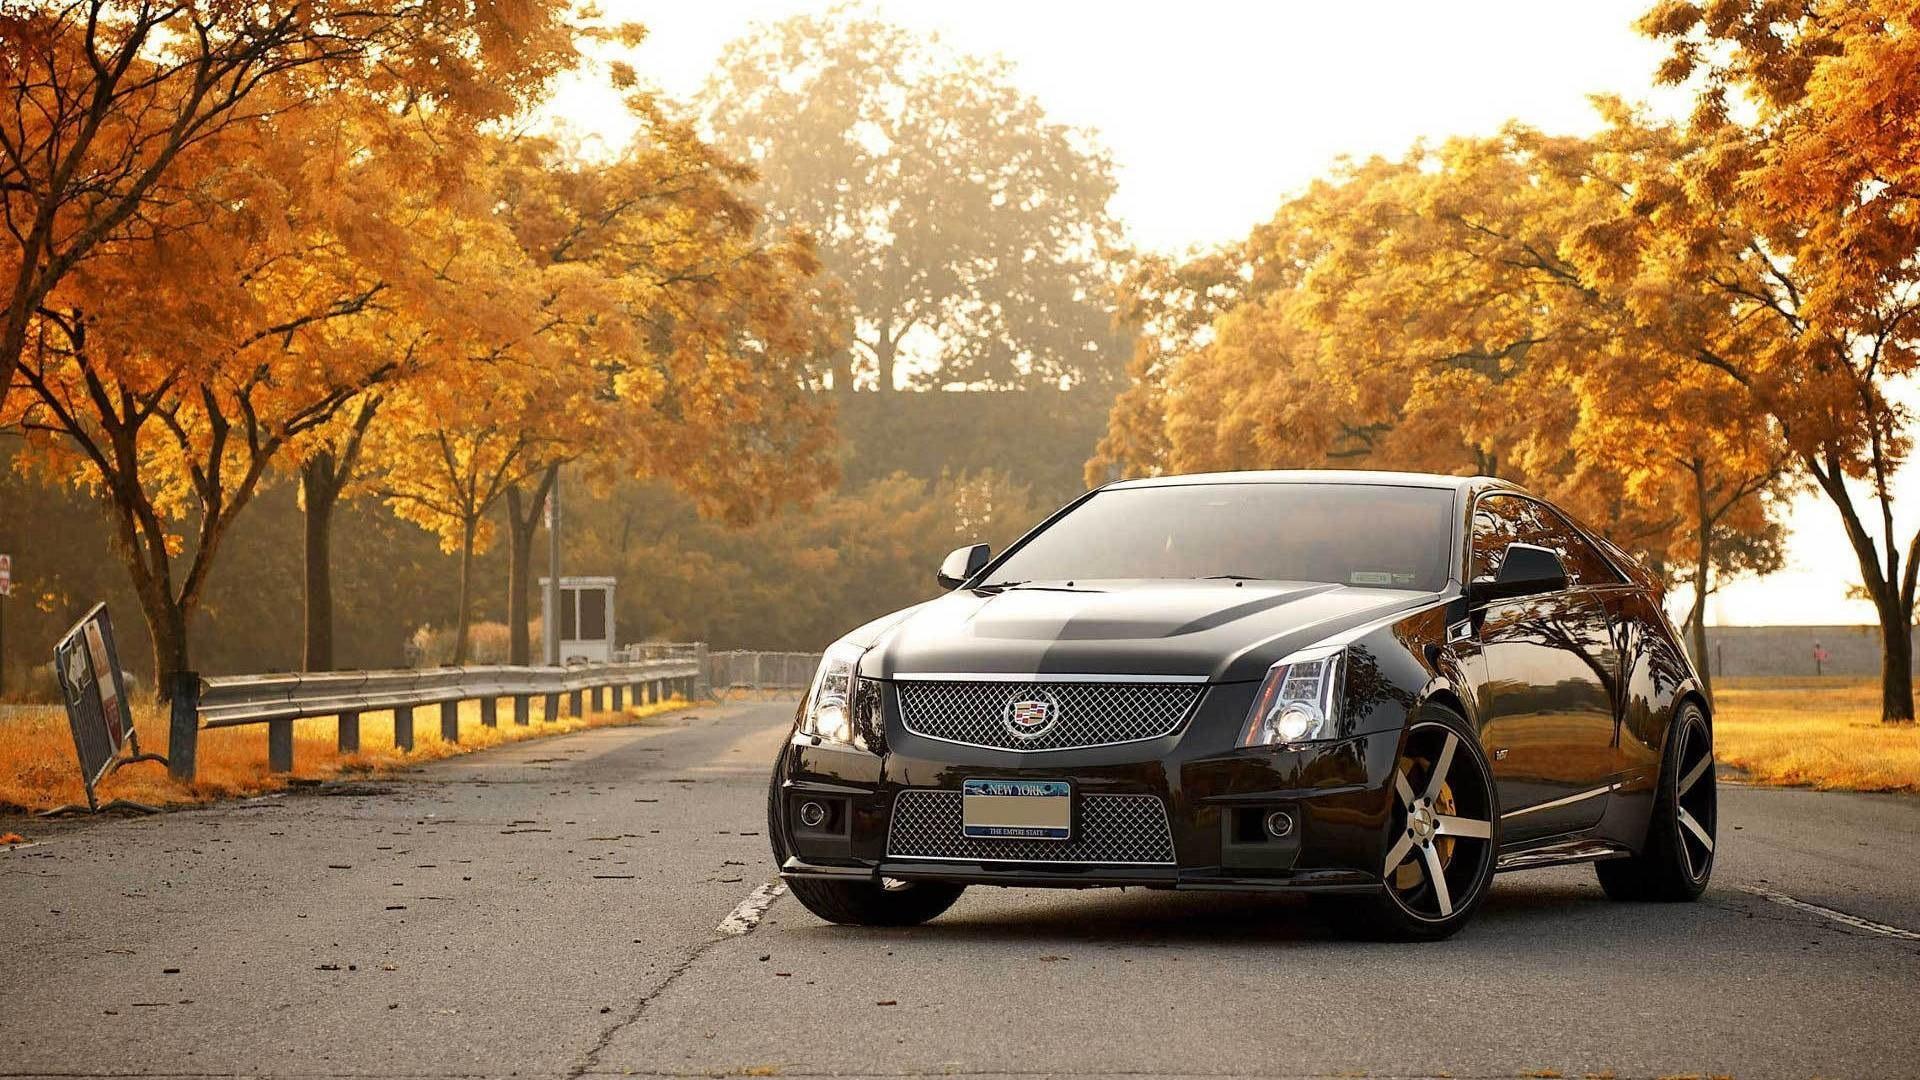 Cadillac Wallpaper background picture